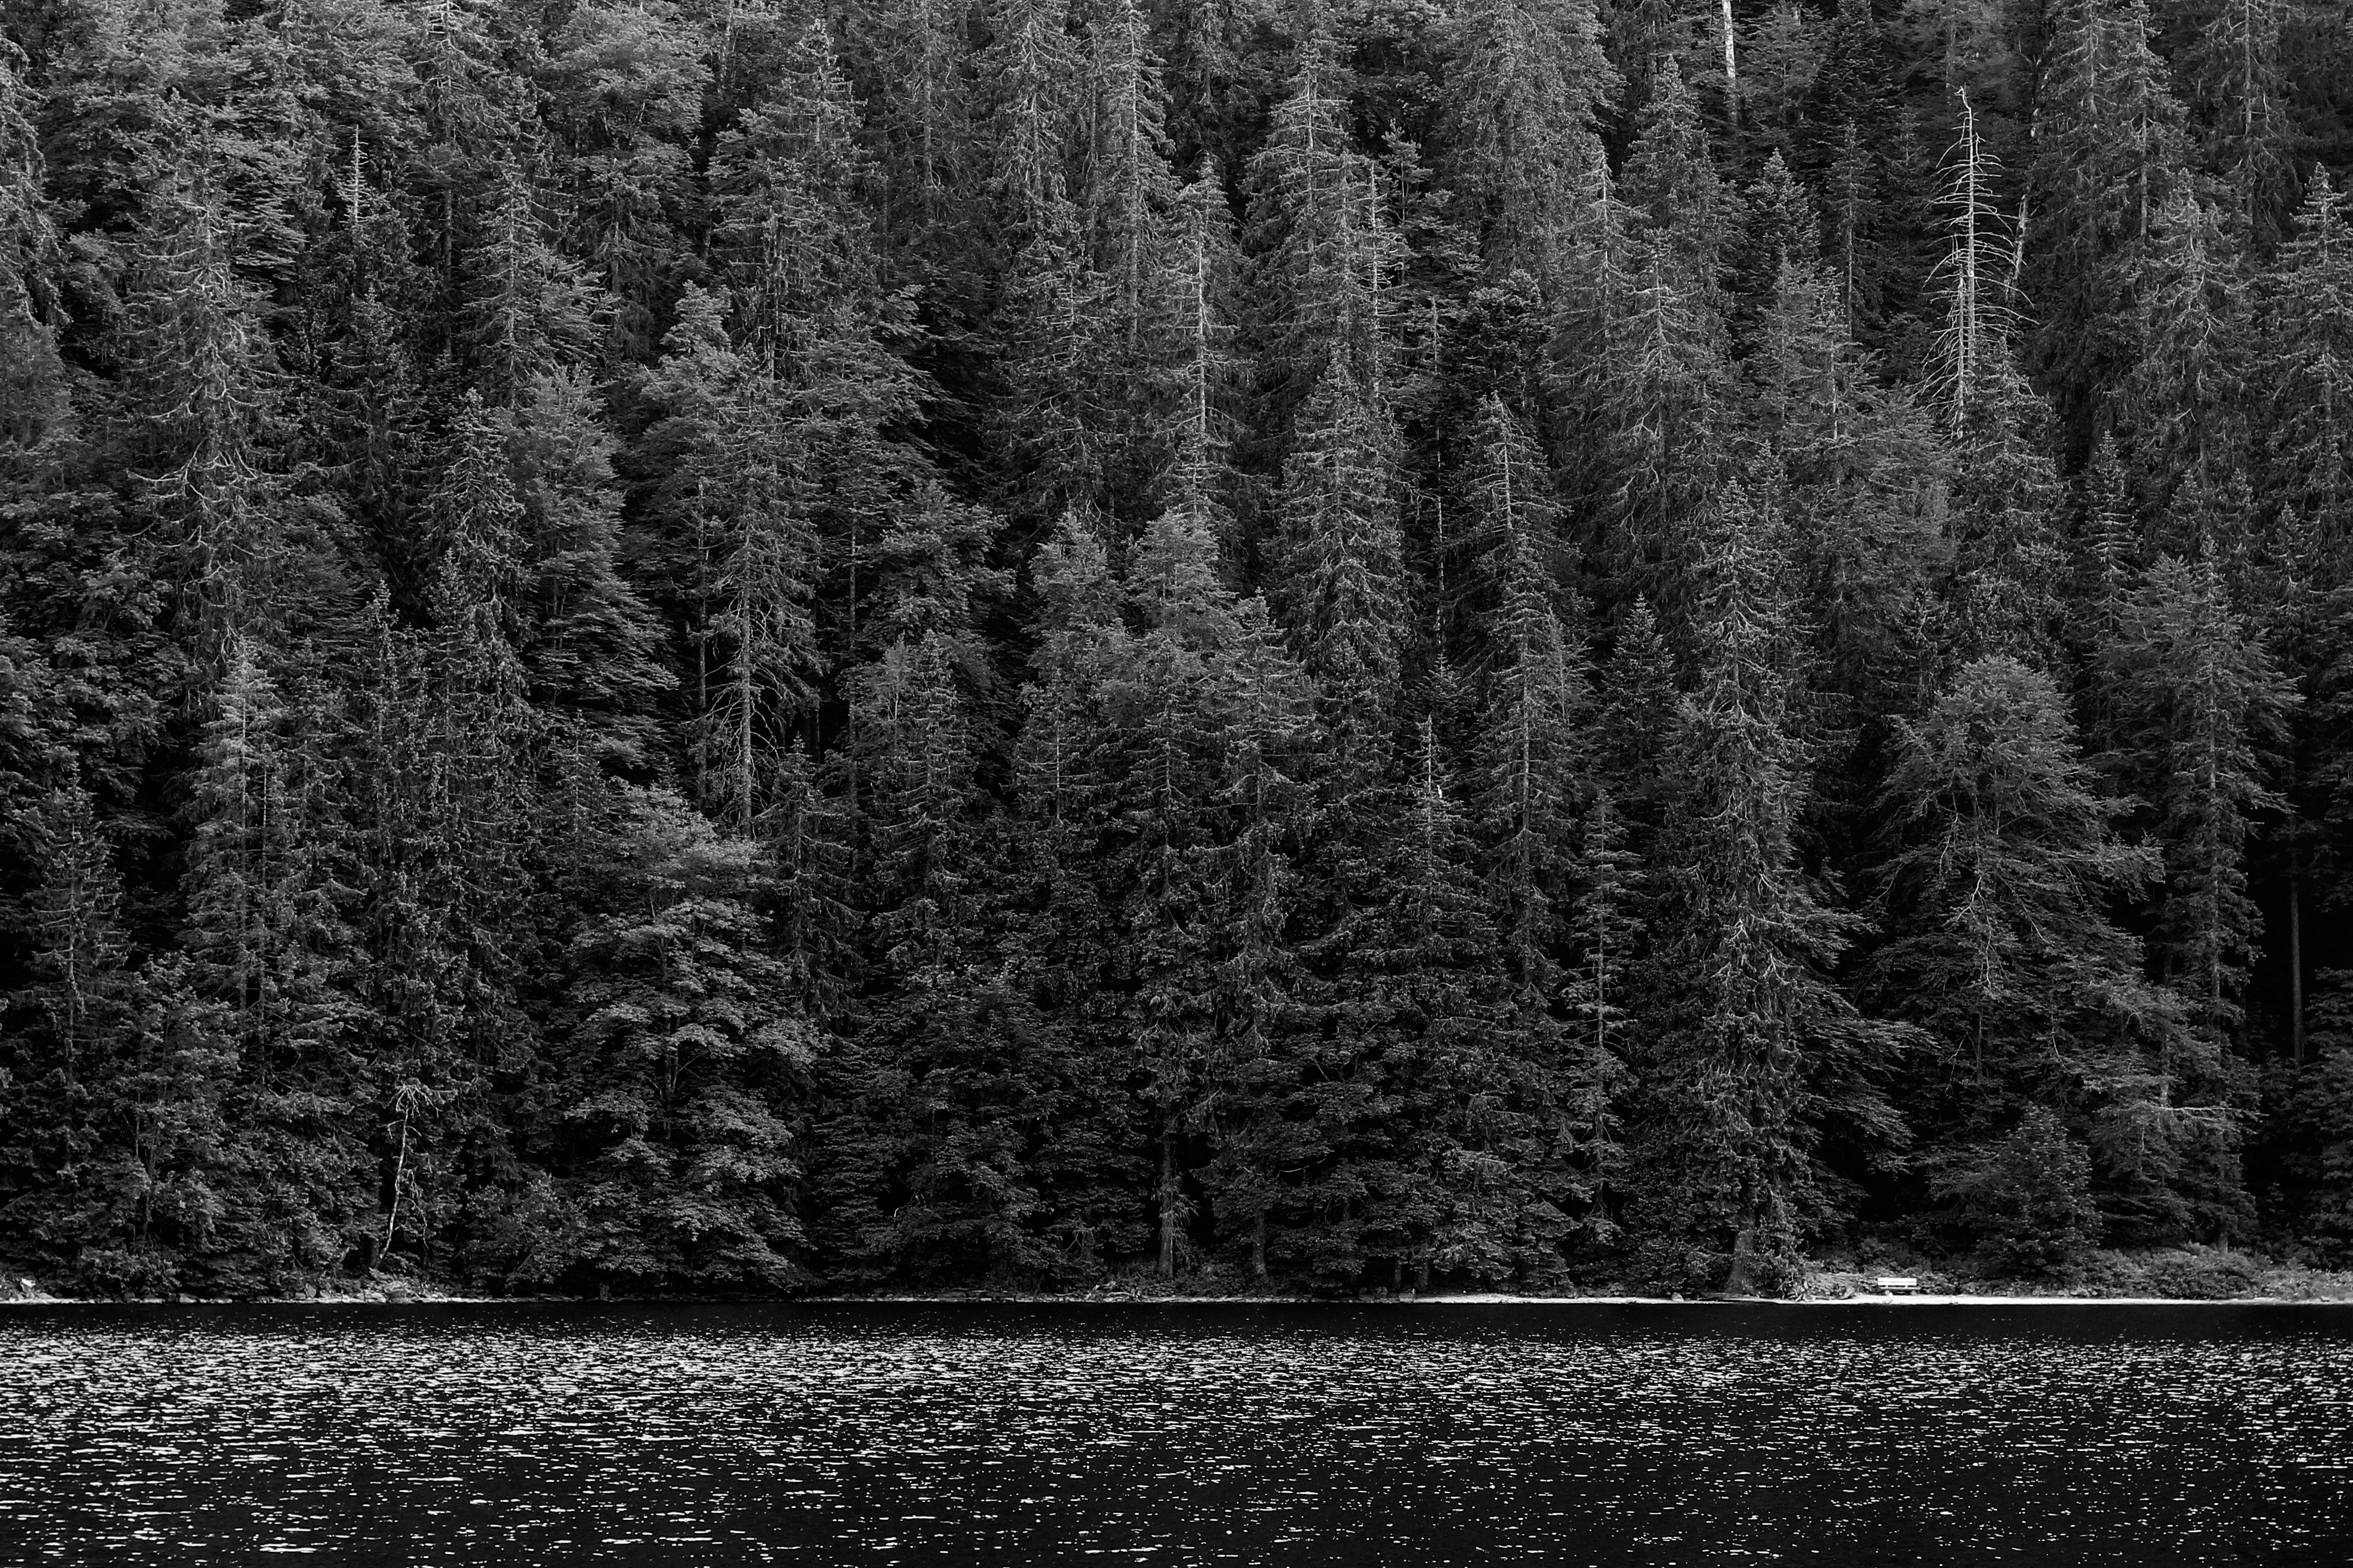 grayscale photography of pine trees near body of water